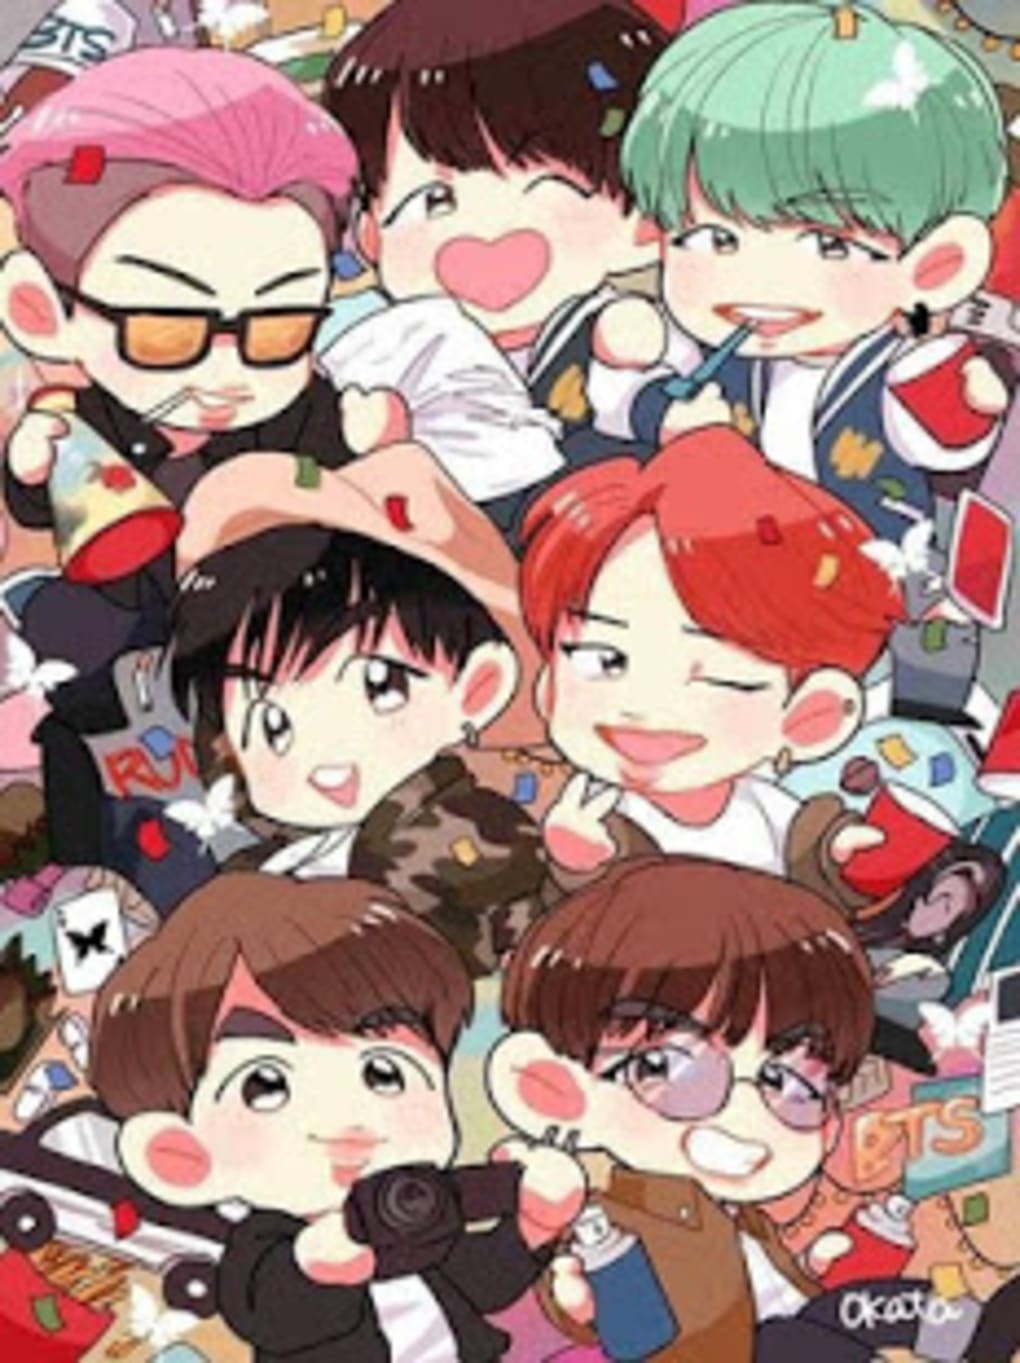 BTS Cute Anime HD Wallpapers - Wallpaper Cave